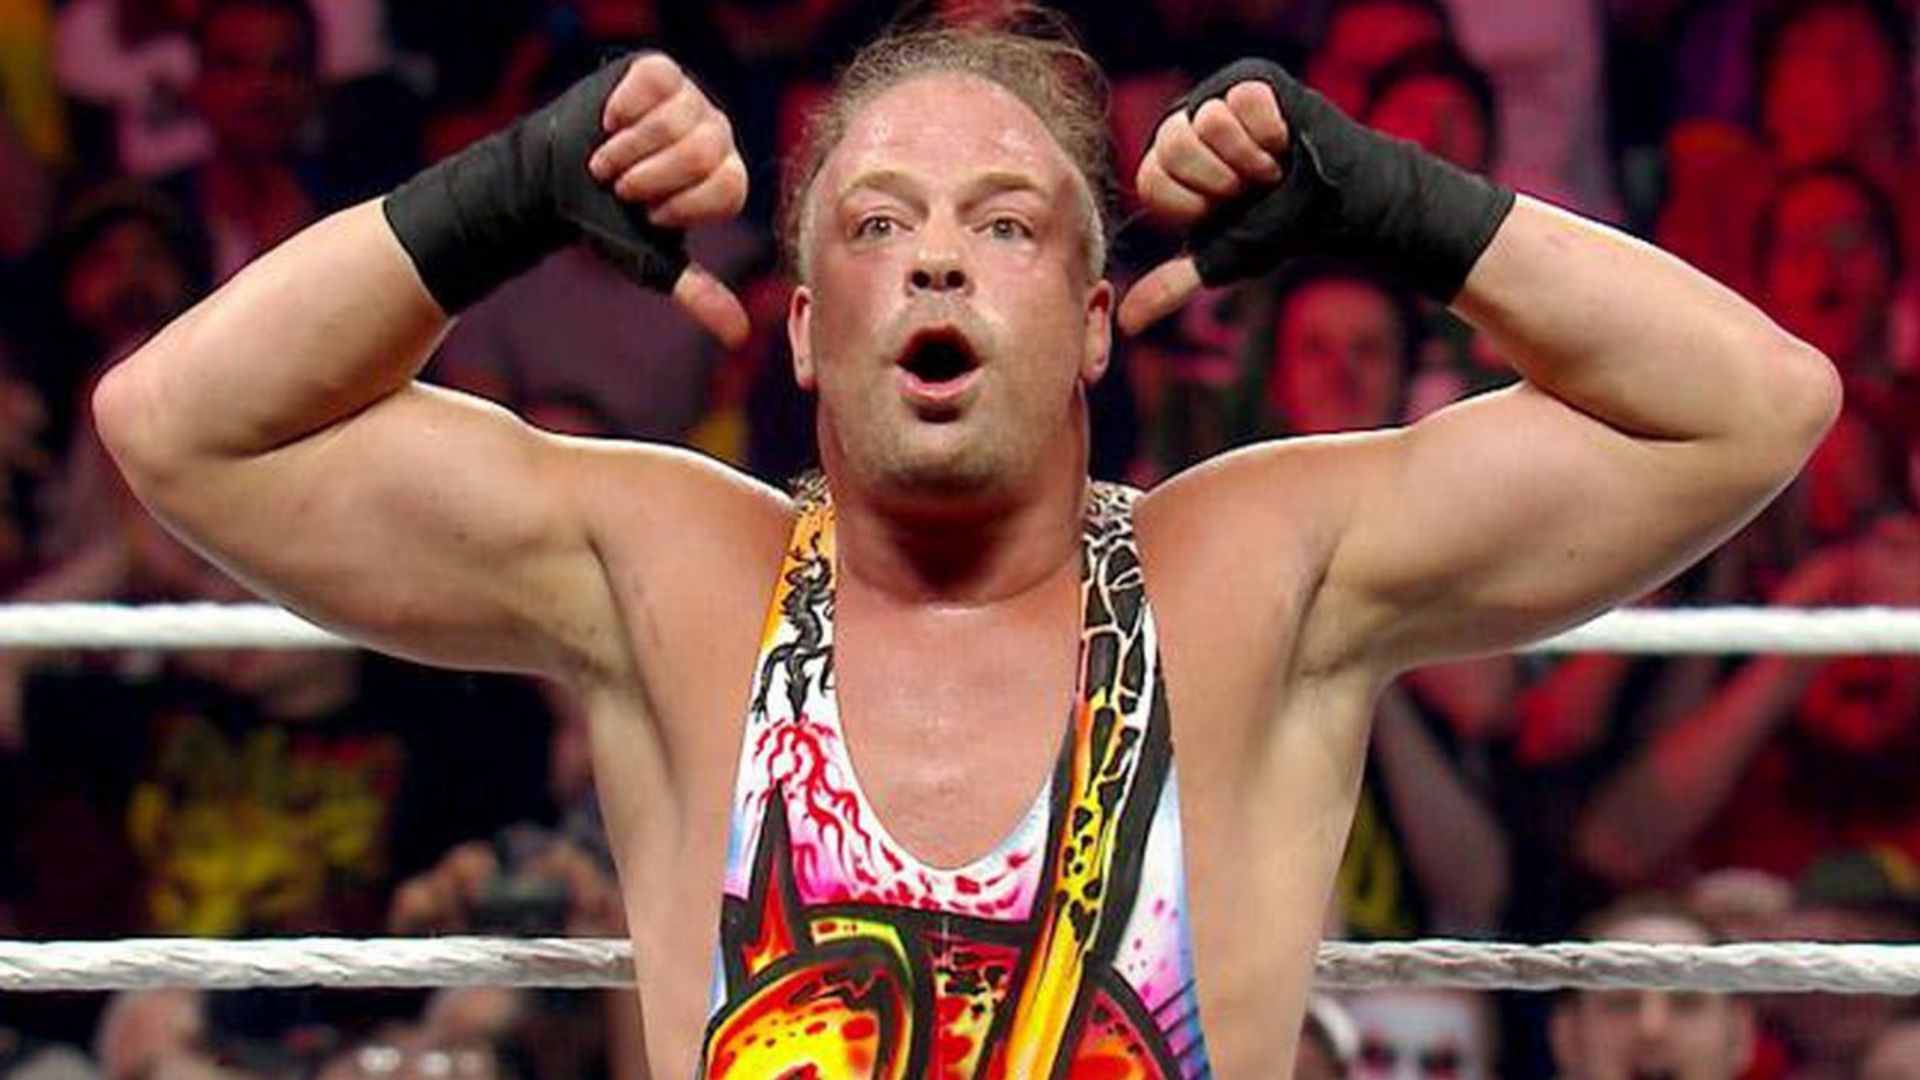 Rob Van Dam has been on a break from in-ring action since September